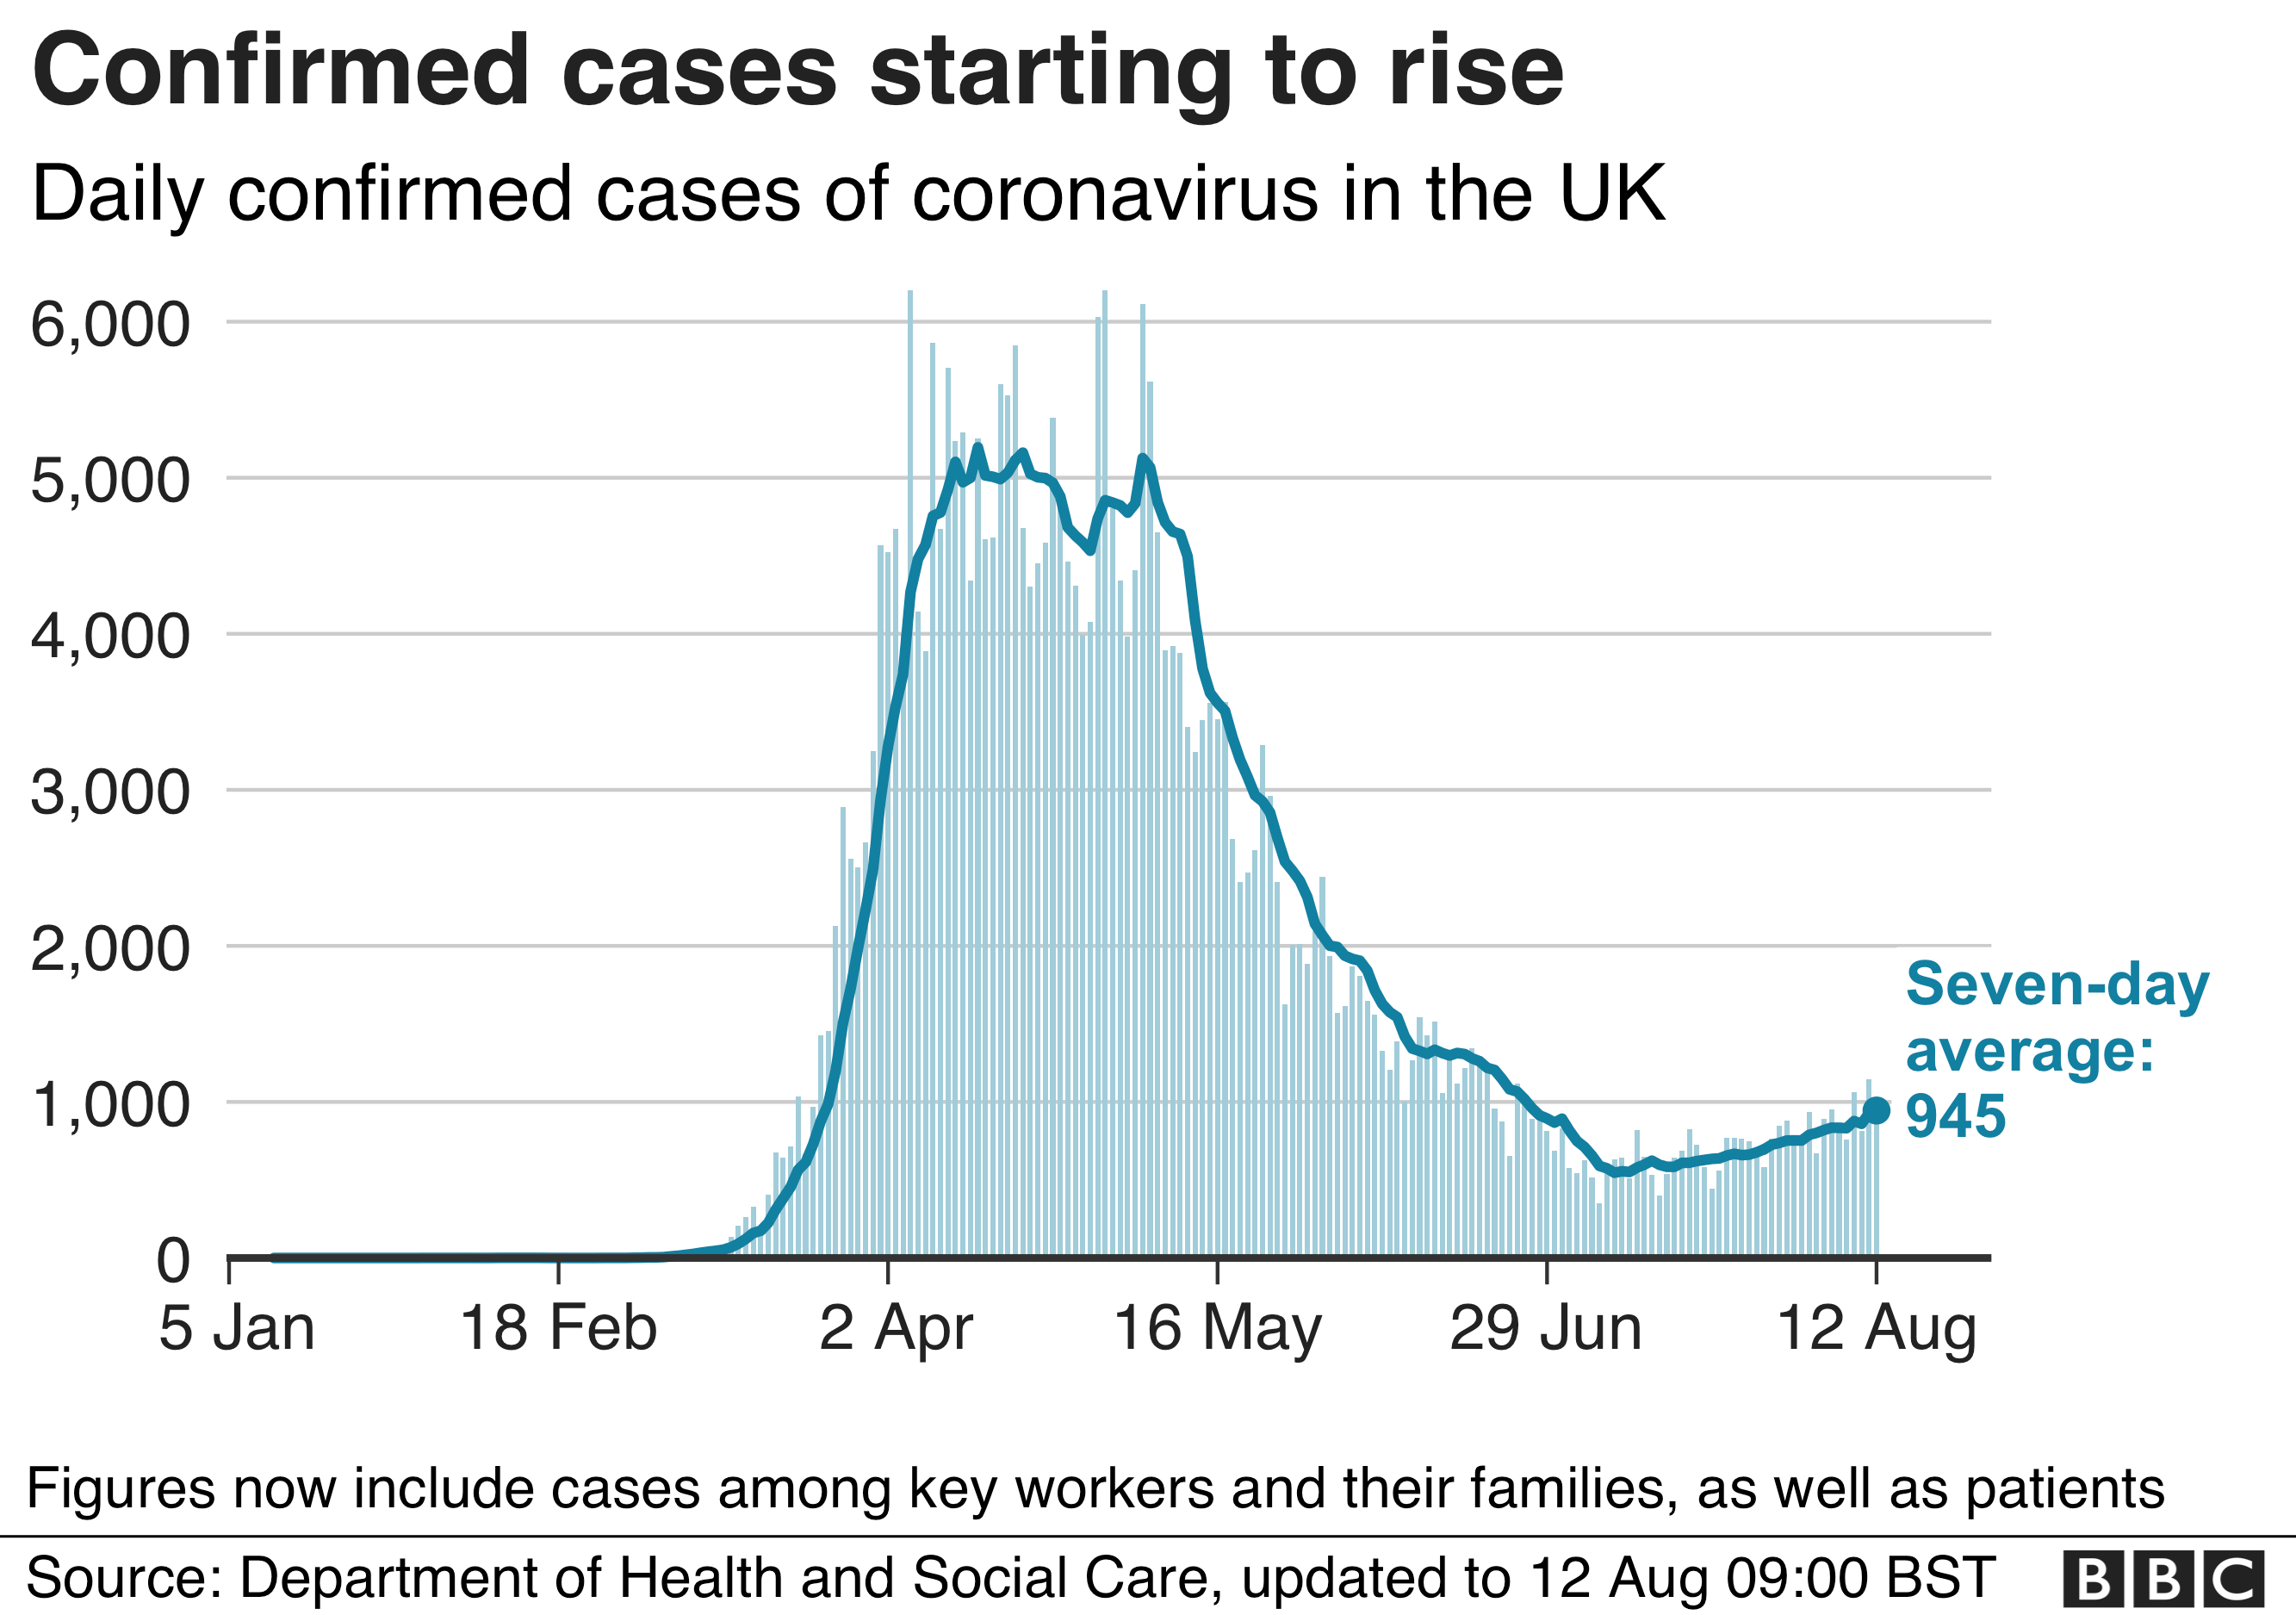 Chart shows daily new cases are starting to rise again